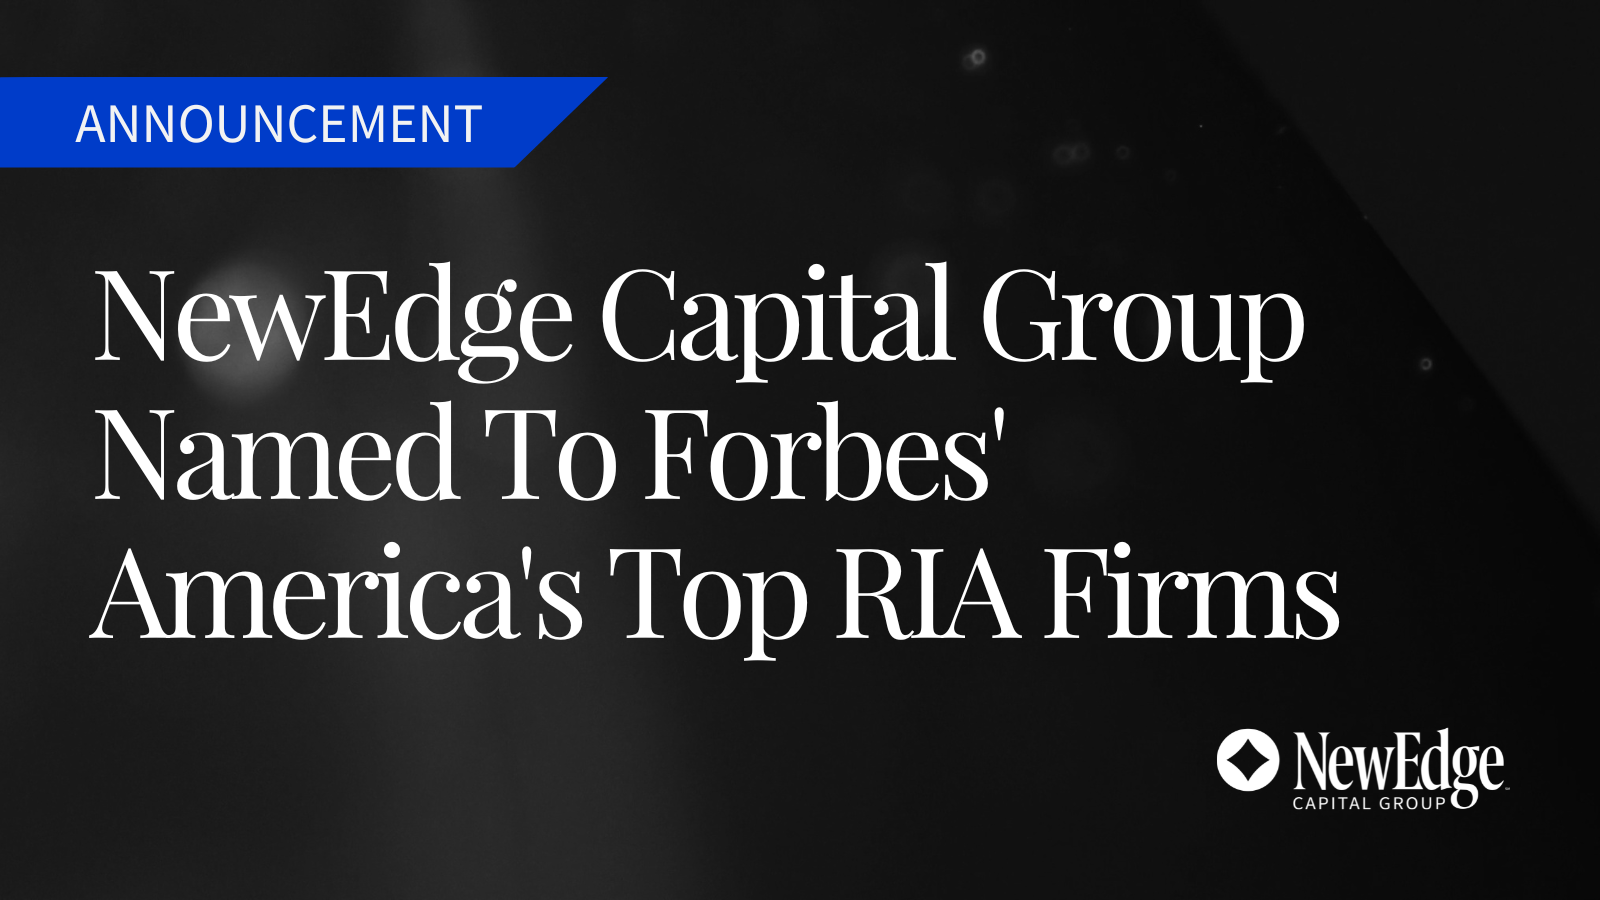 NewEdge Capital Group Named by Forbes to its Ranking of America’s Top RIA Firms